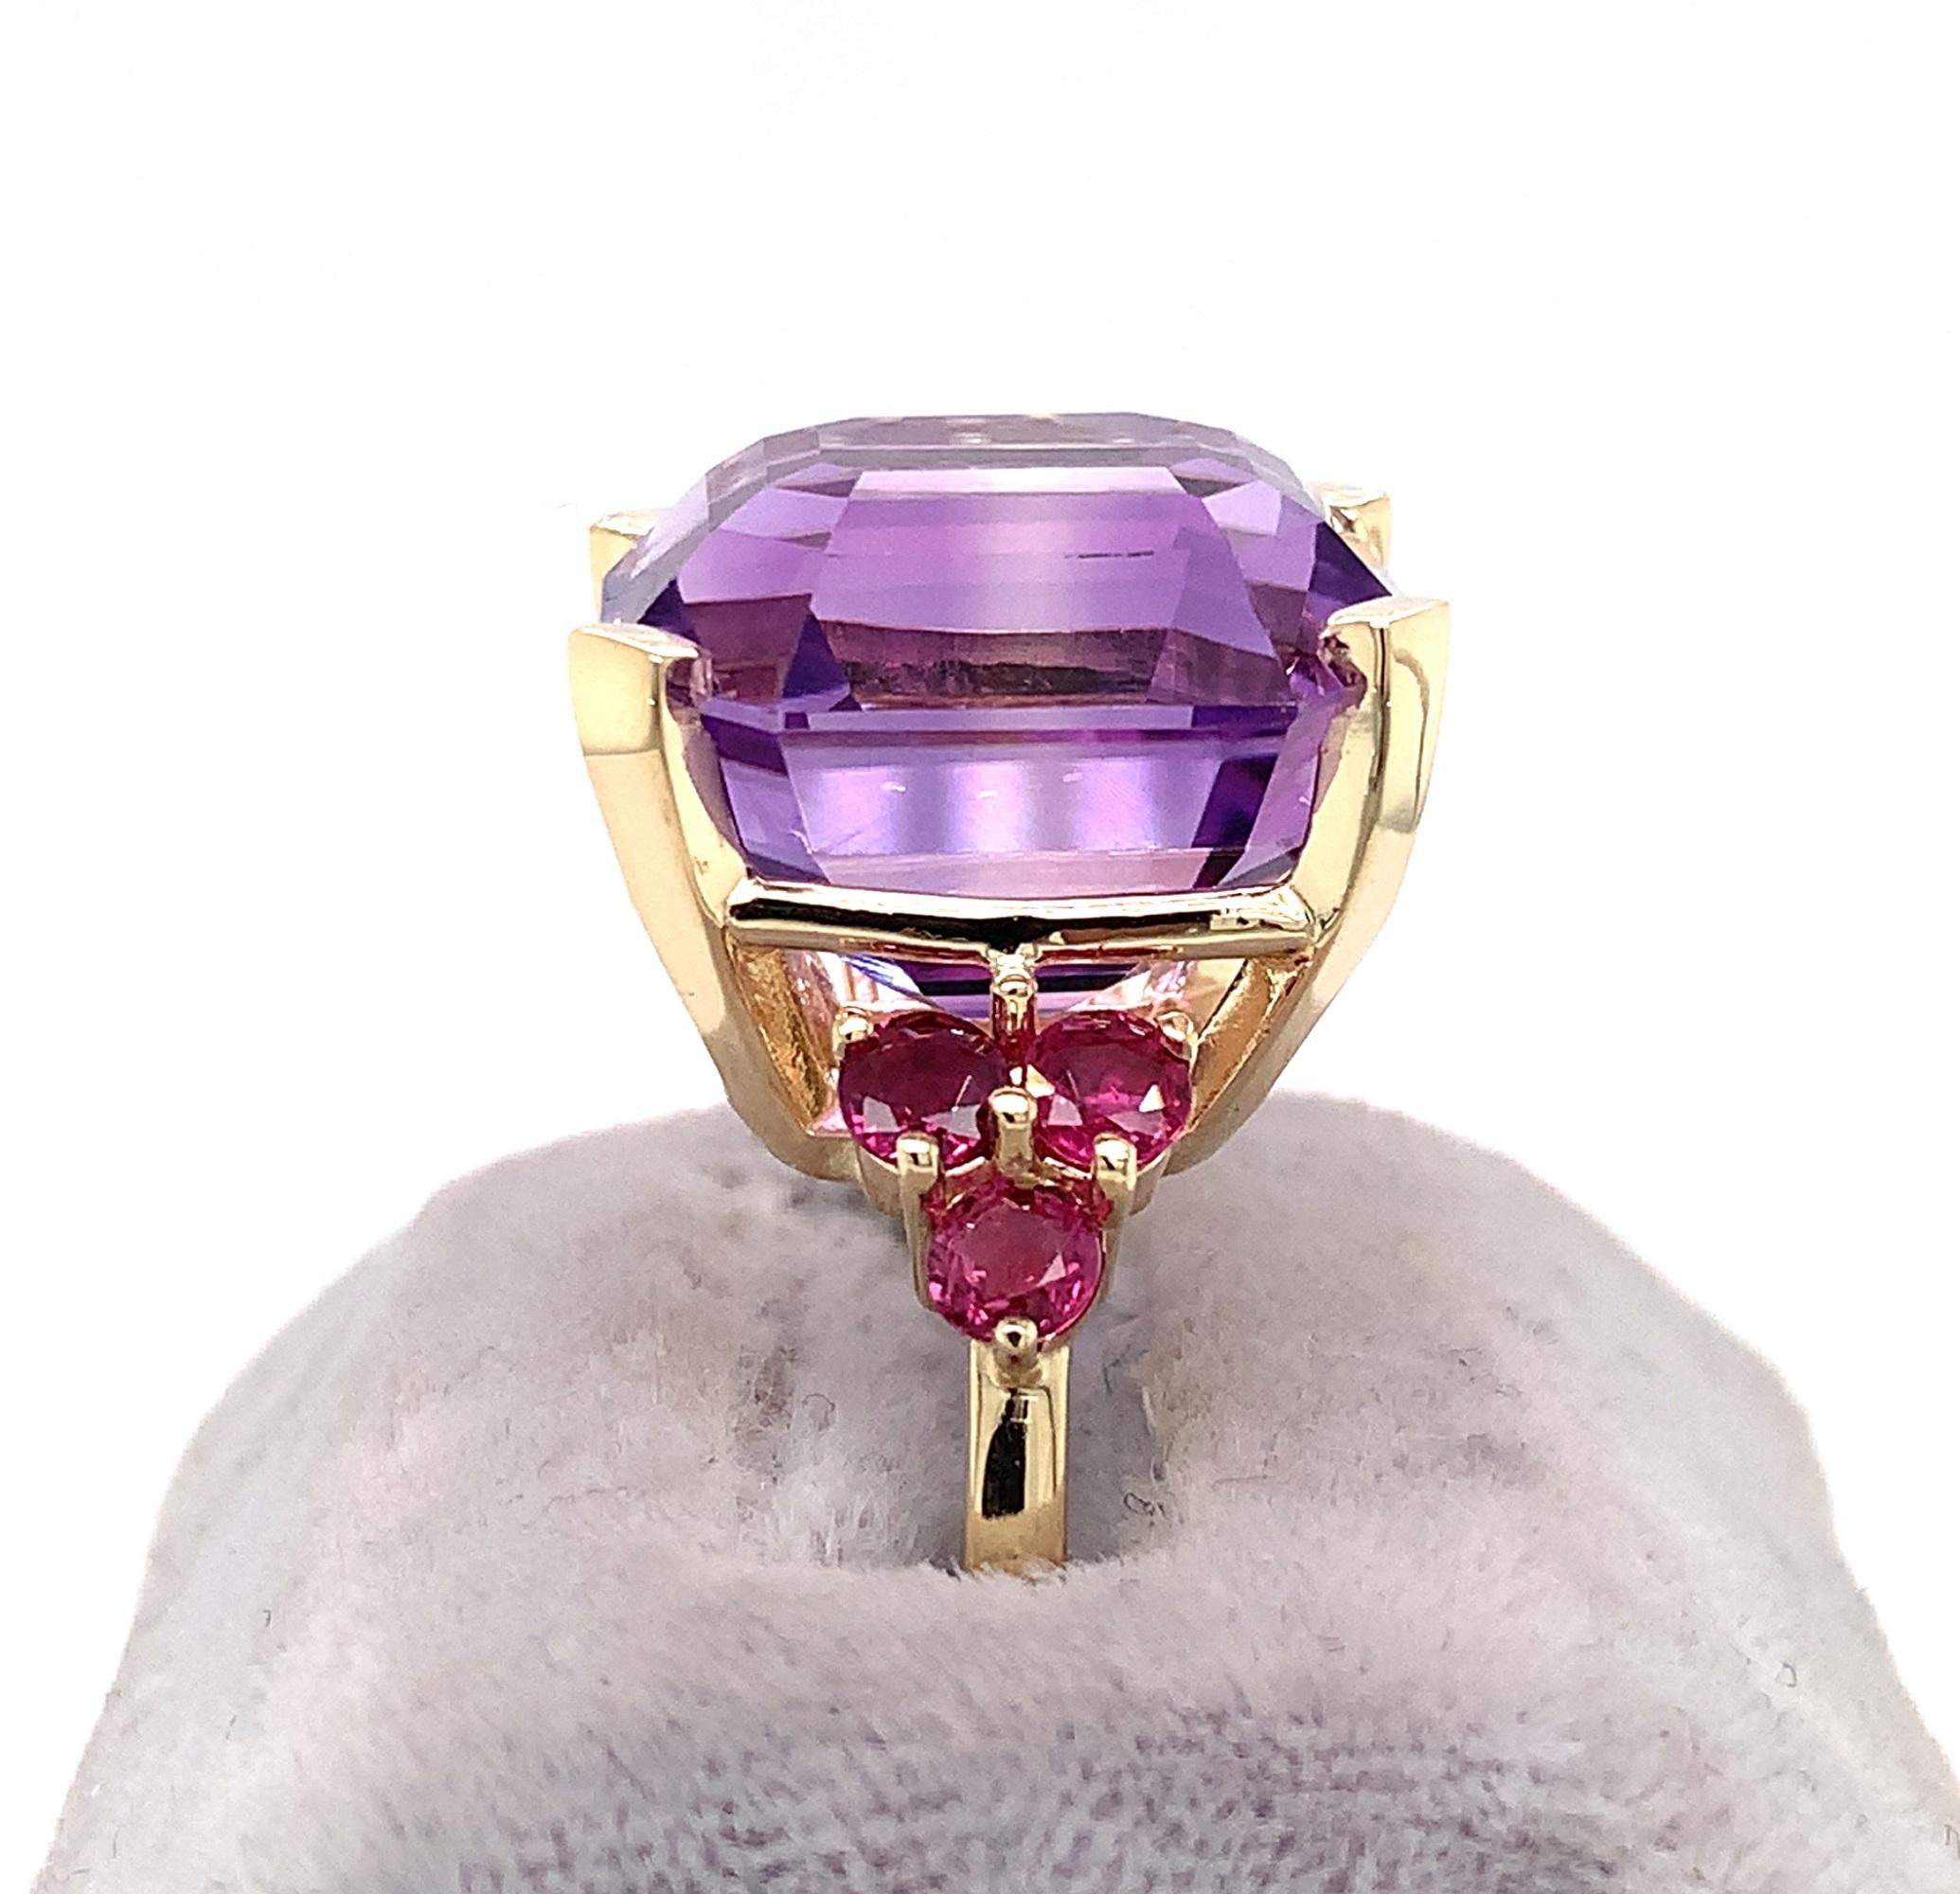 14K yellow gold amethyst and ruby ring featuring a huge asscher cut amethyst. The amethyst is a medium purple color, weighs 20.42 carats and measures about 16.8mm x 15.2mm. There are 6 round ruby accents, each measuring about 3.5mm. The ring fits a